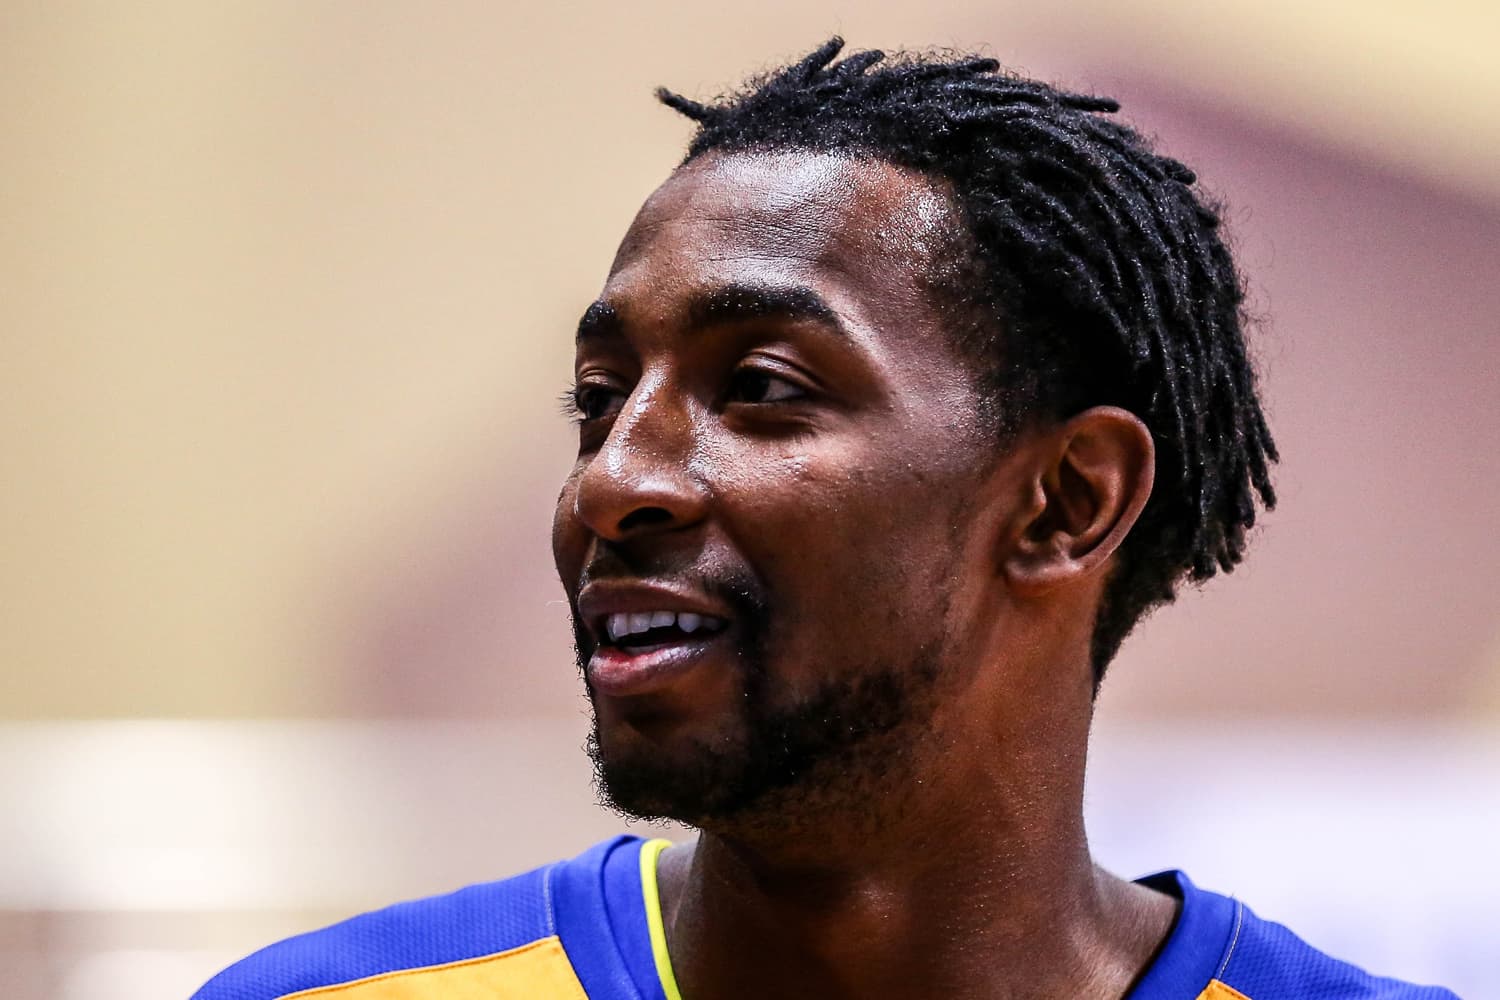 Jeremy Evans: I Can Draw A Portrait Of Anyone At Khimki